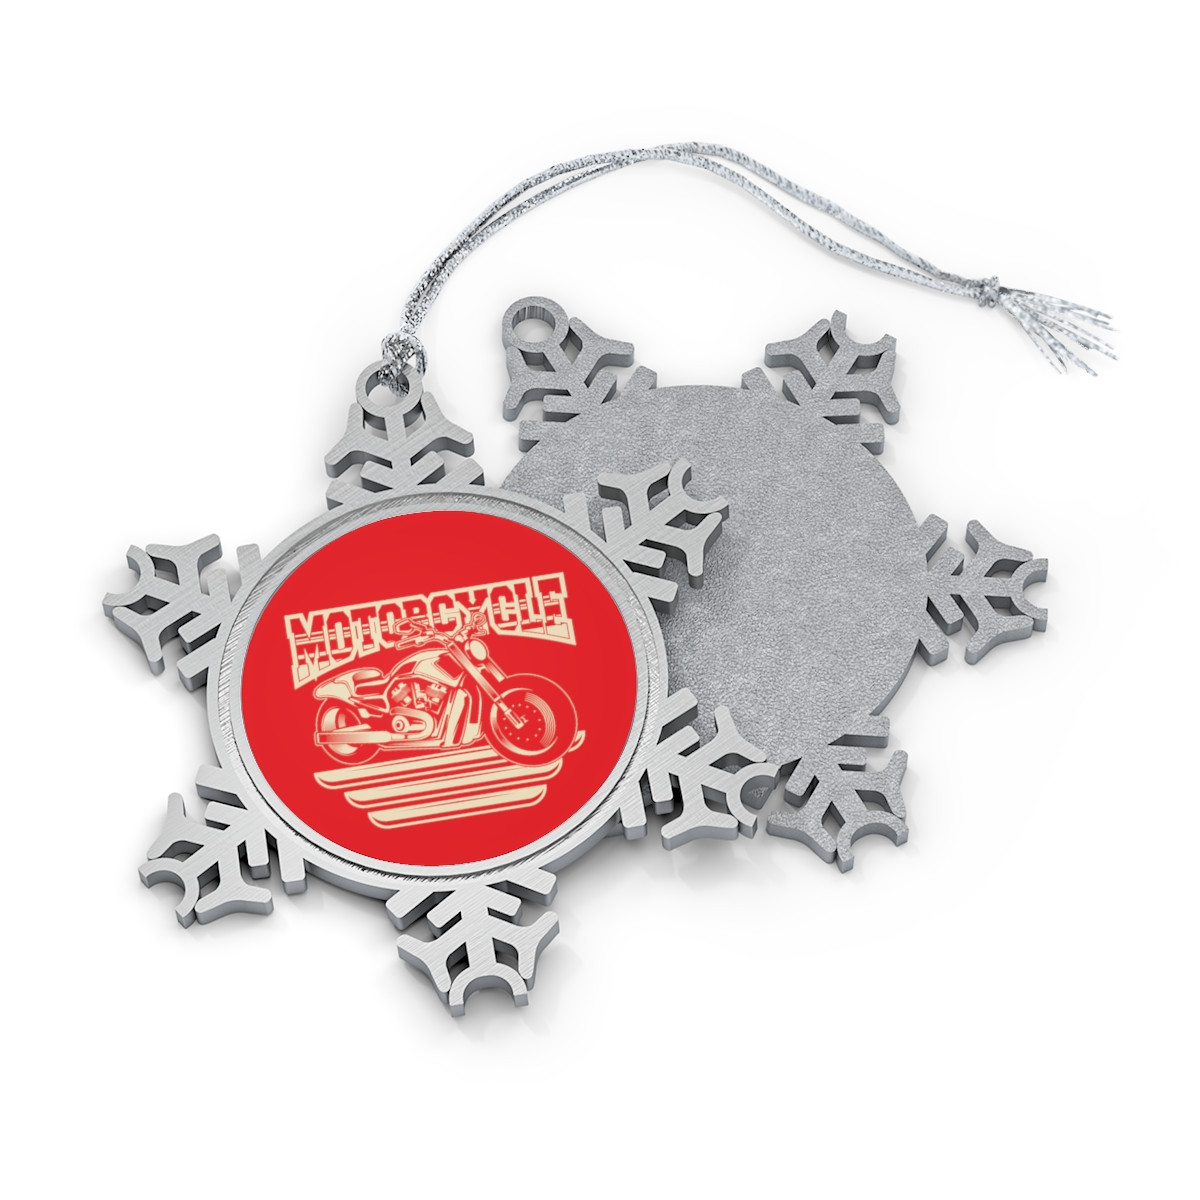 Motorcycle Pewter Snowflake Ornament